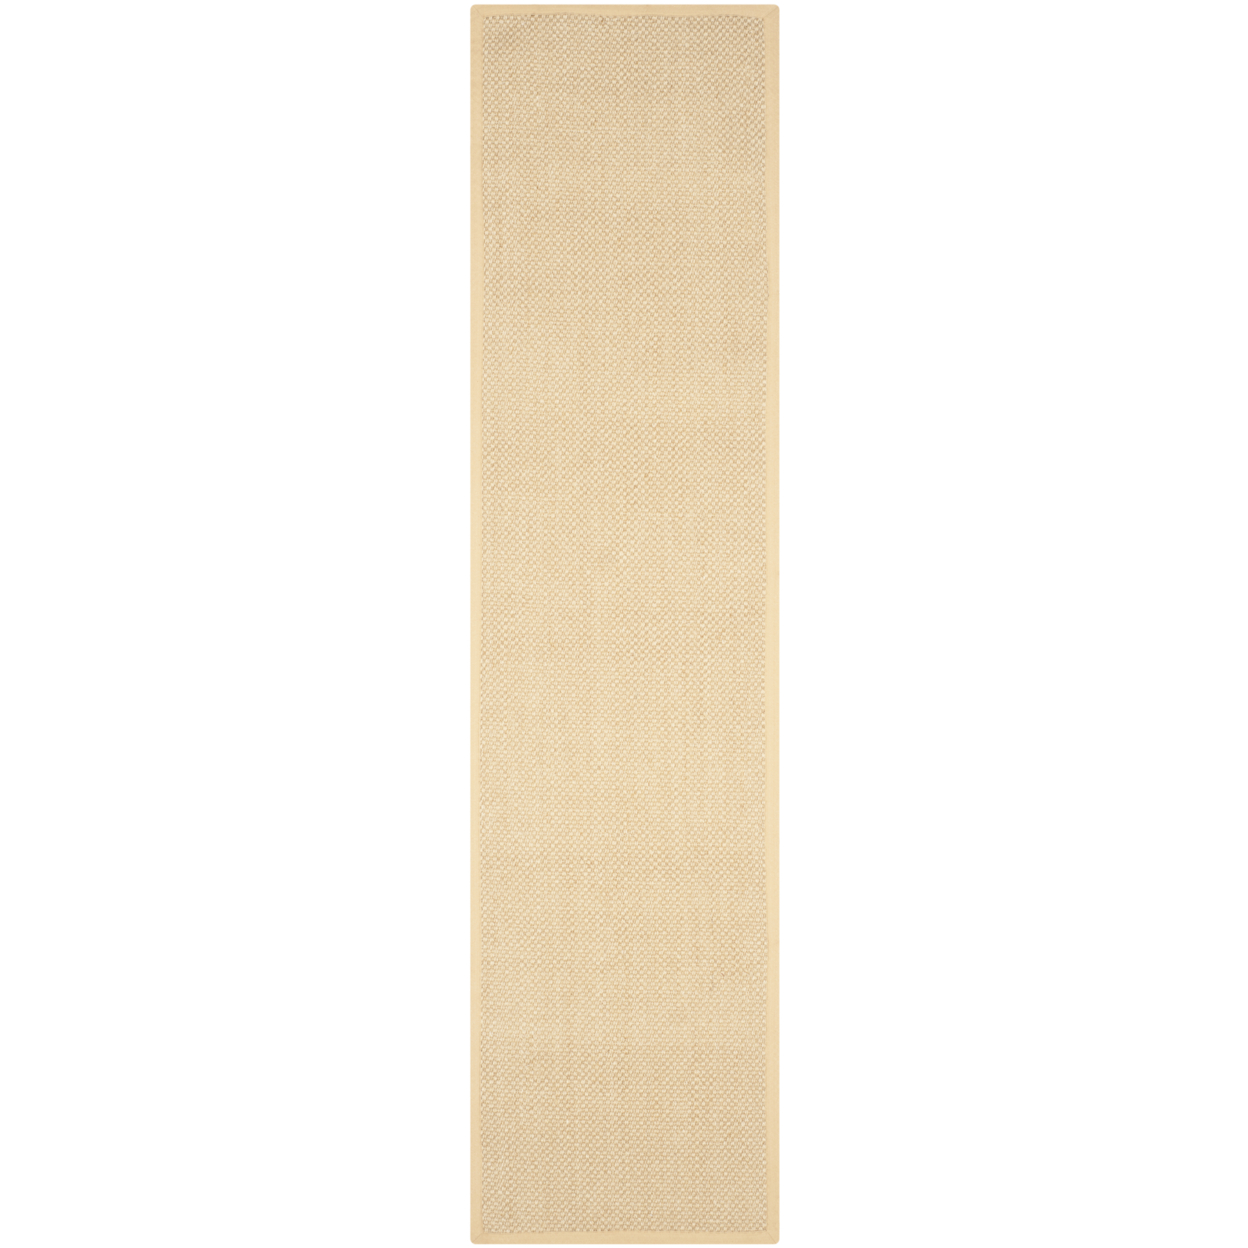 SAFAVIEH Natural Fiber Collection NF443A Maize/Wheat Rug - 9' X 12'